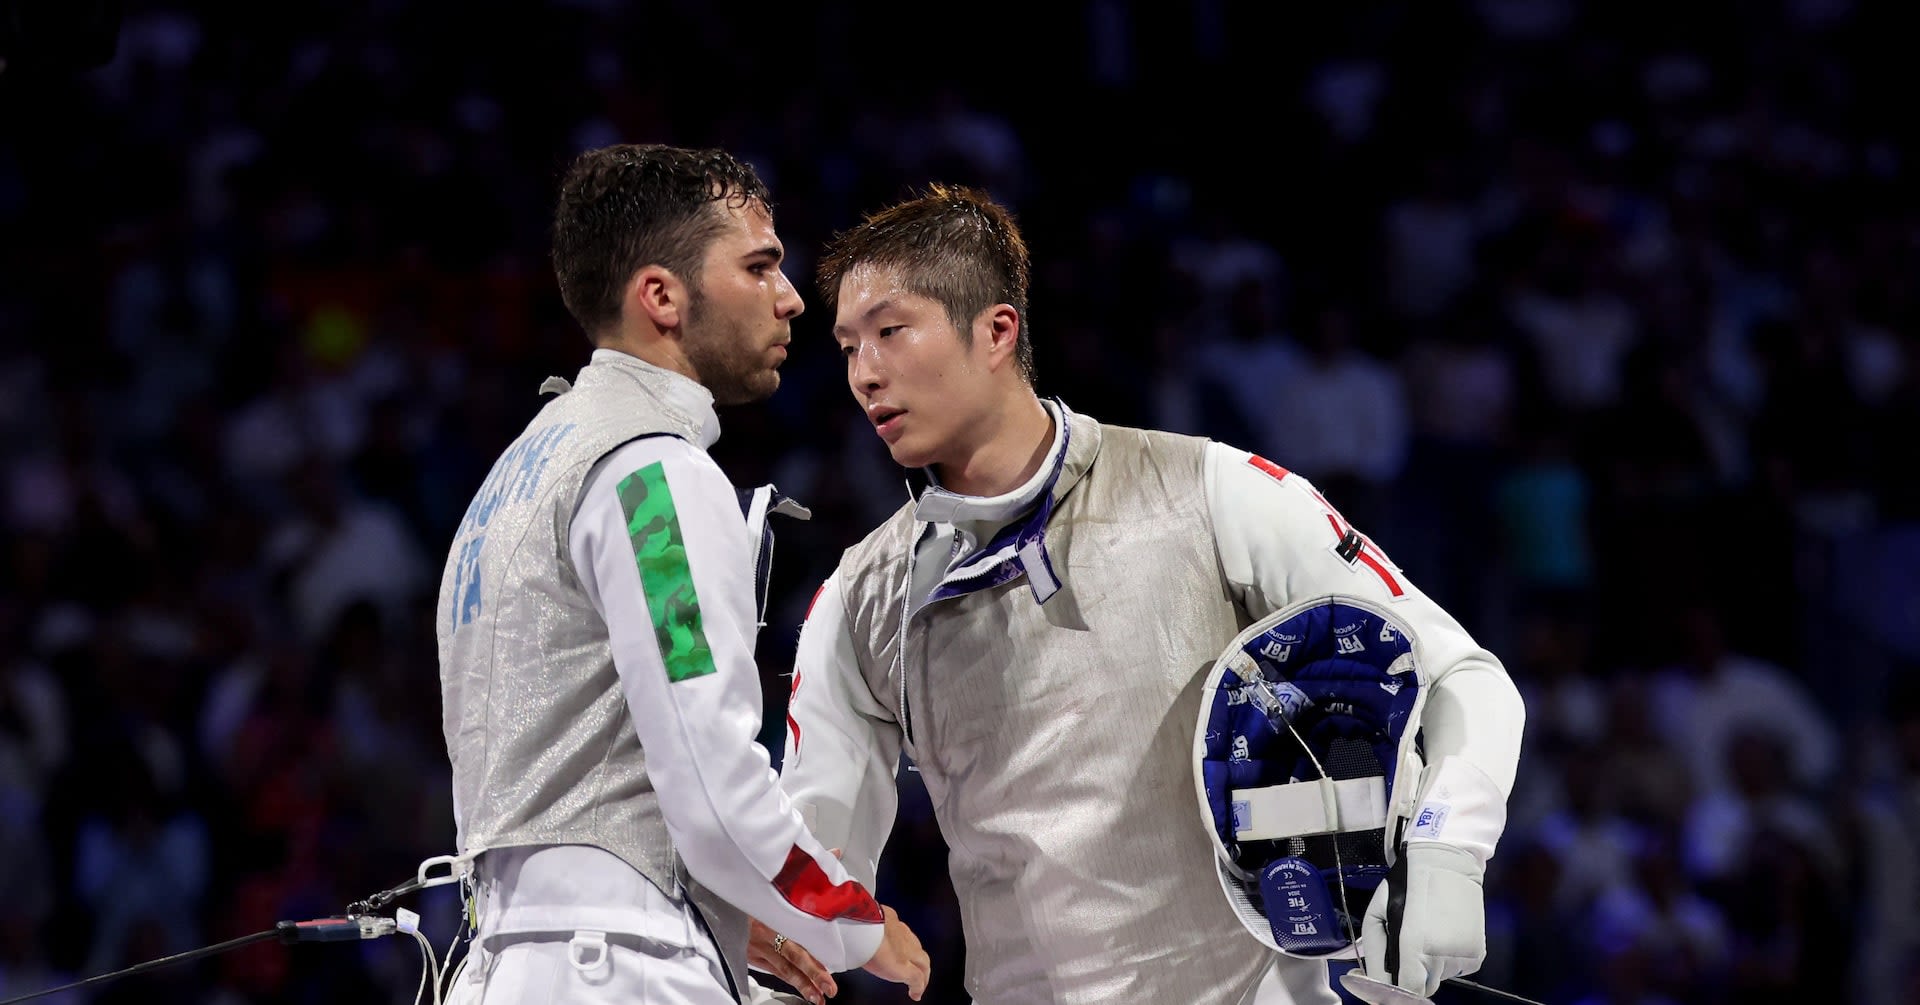 Fencing-Pineapple pizza insults fly over Italian-Hong Kong fencing final